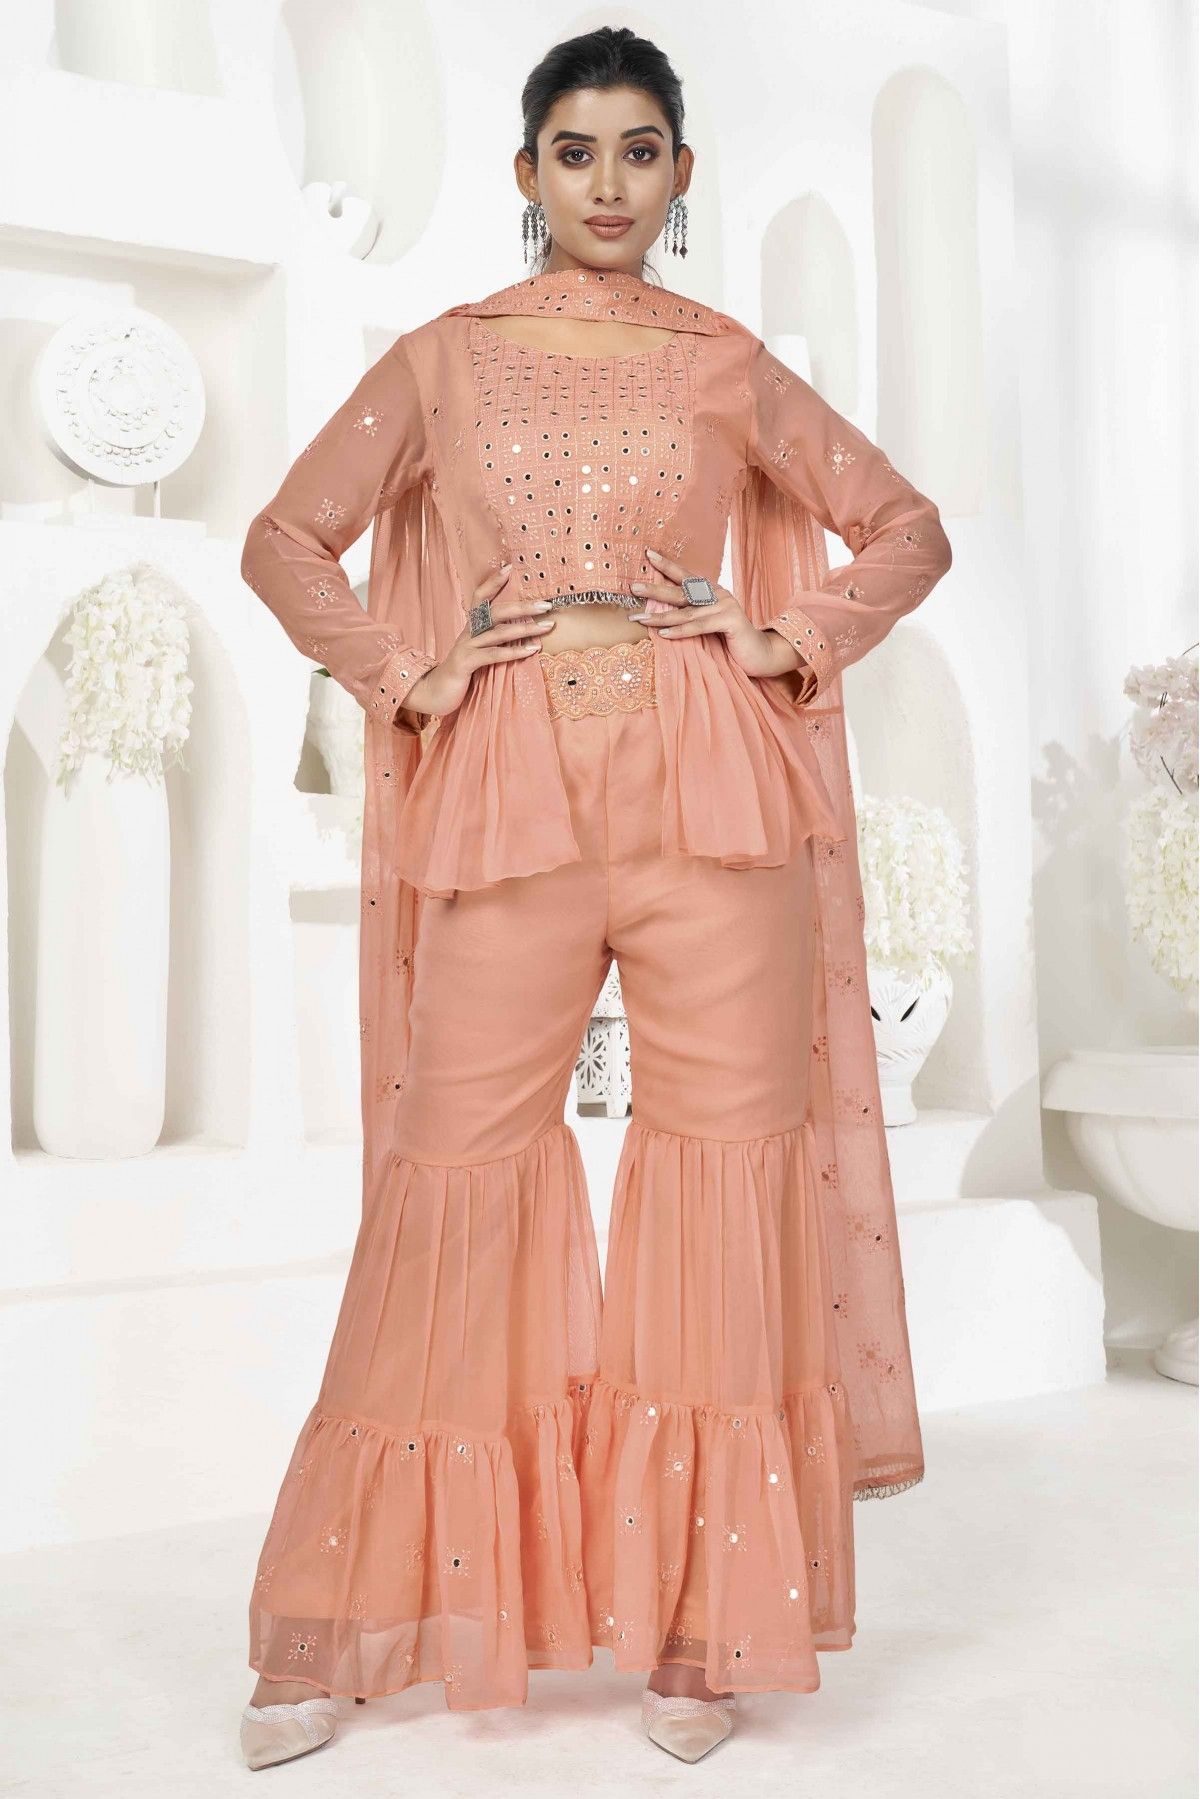 https://ik.imagekit.io/bhsa3gea8yj/products/tr:w-1200/2022/May/Stitched-Georgette-Embroidery-Fusion-Wear-In-Peach-Colour-SS5413938-A.jpg